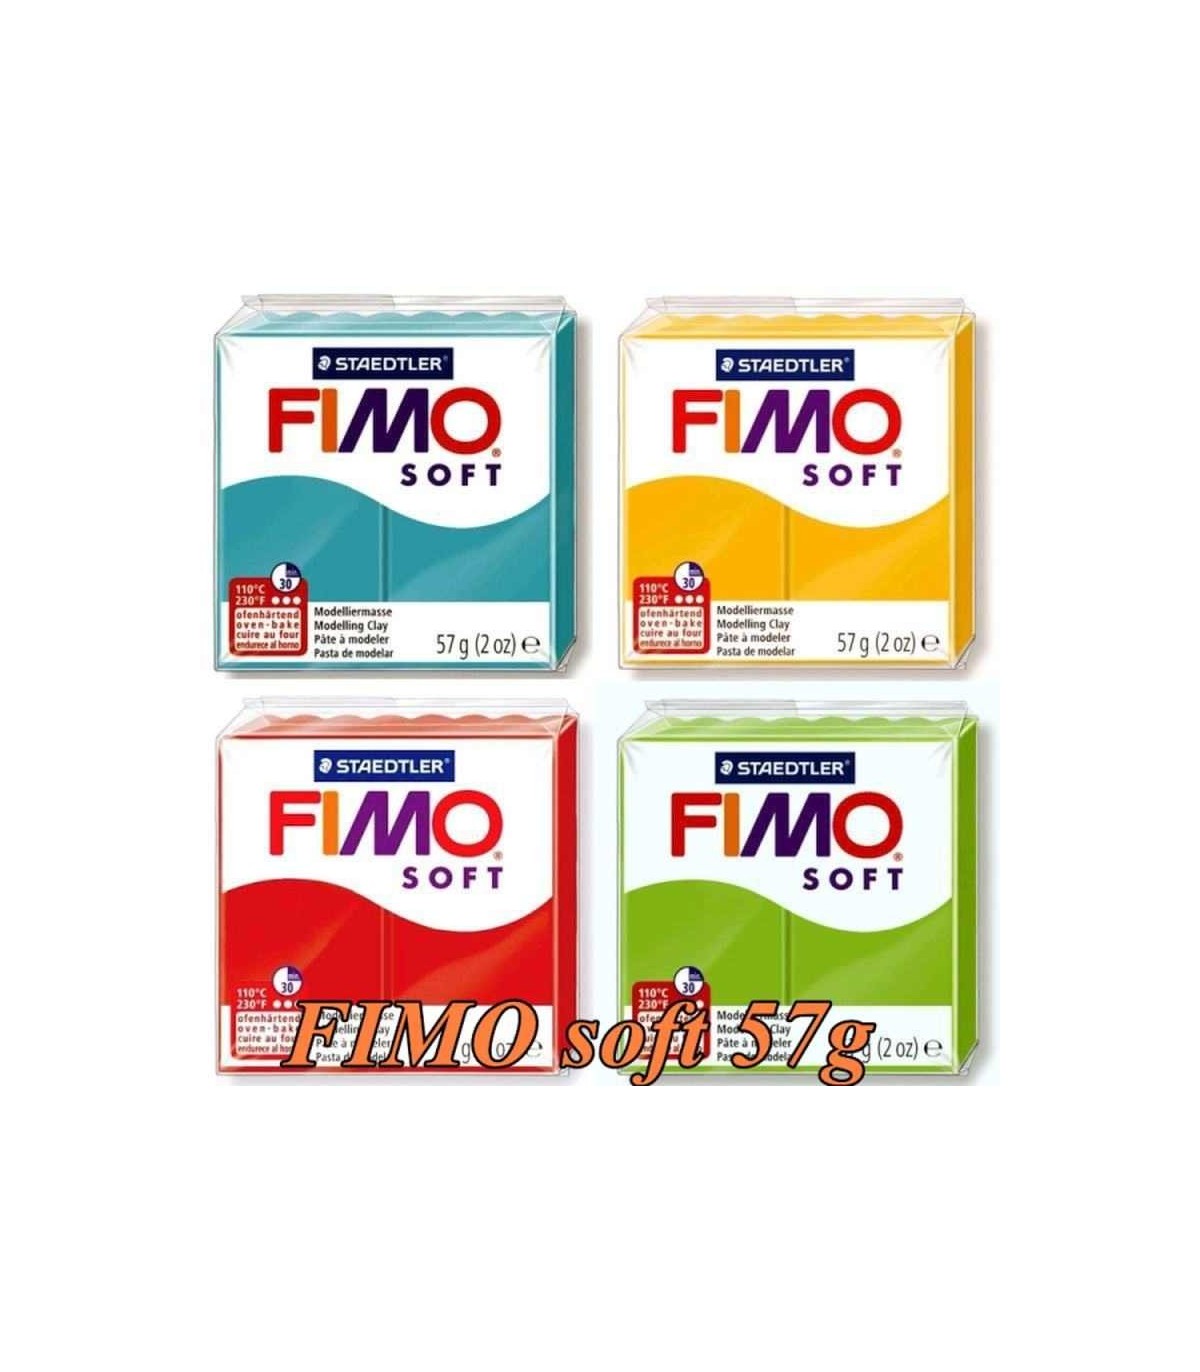 FIMO Soft Serie Polymer Clay, Emerald, Nr. 56, 57g 2oz, Oven-hardening  Polymer Modeling Clay, Basic Fimo Soft Colors by STAEDTLER -  Norway